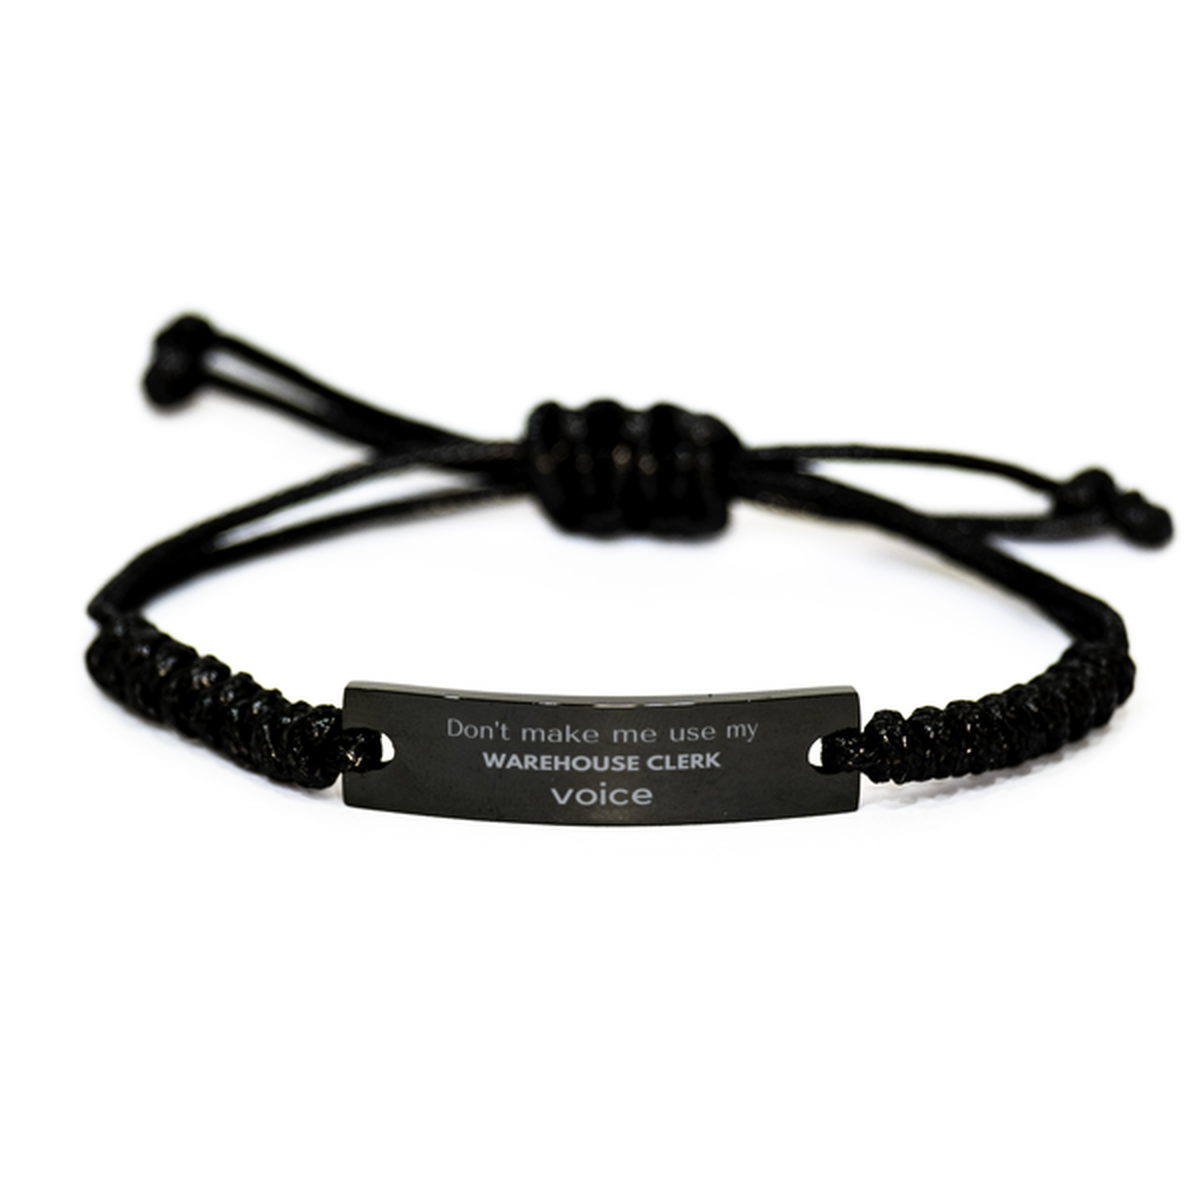 Don't make me use my Warehouse Clerk voice, Sarcasm Warehouse Clerk Gifts, Christmas Warehouse Clerk Black Rope Bracelet Birthday Unique Gifts For Warehouse Clerk Coworkers, Men, Women, Colleague, Friends